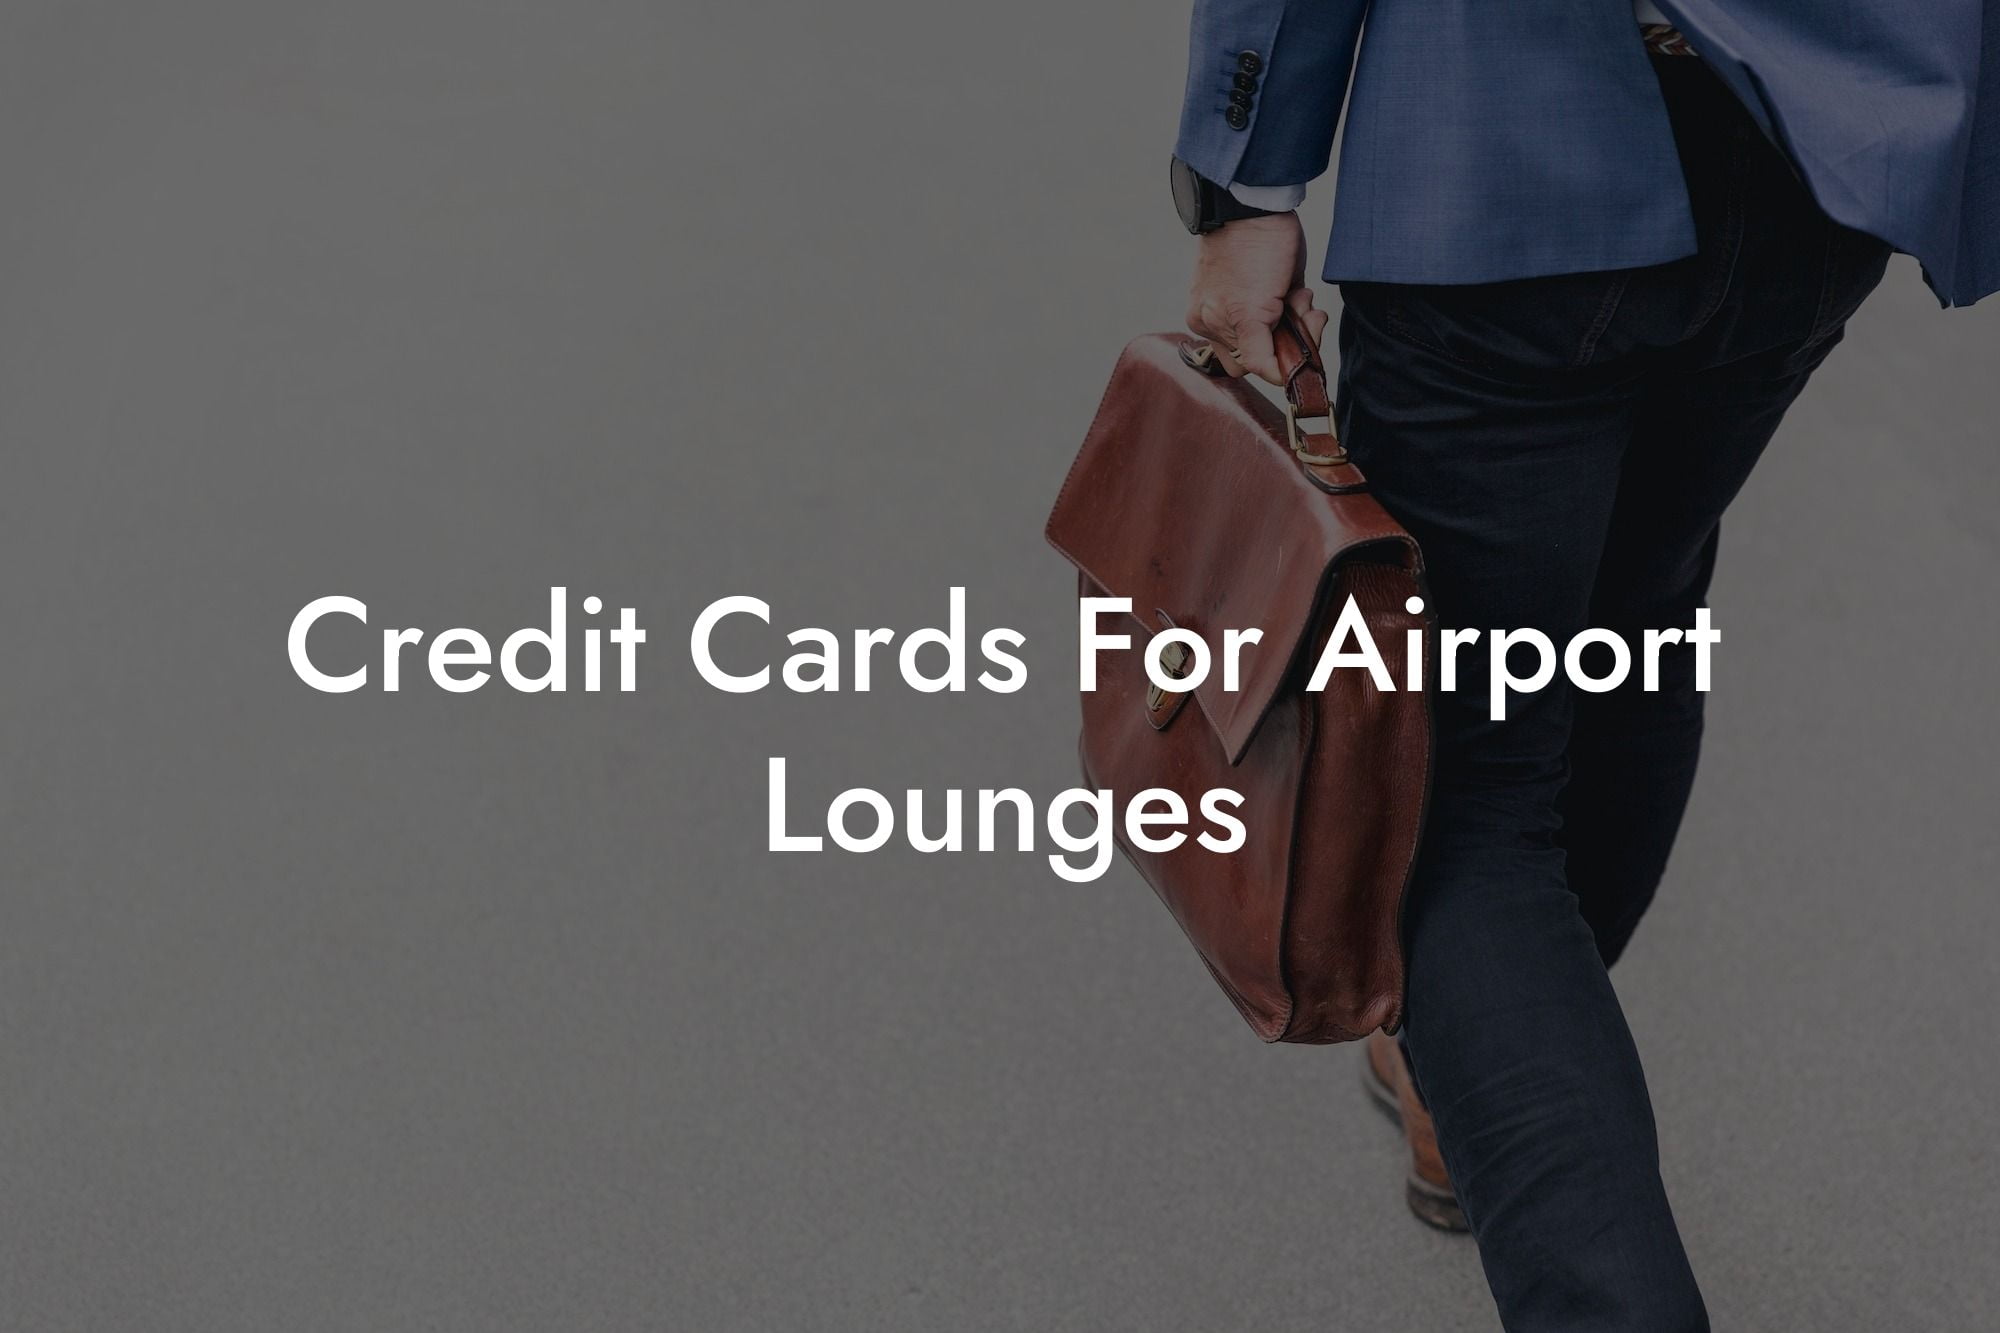 Credit Cards For Airport Lounges